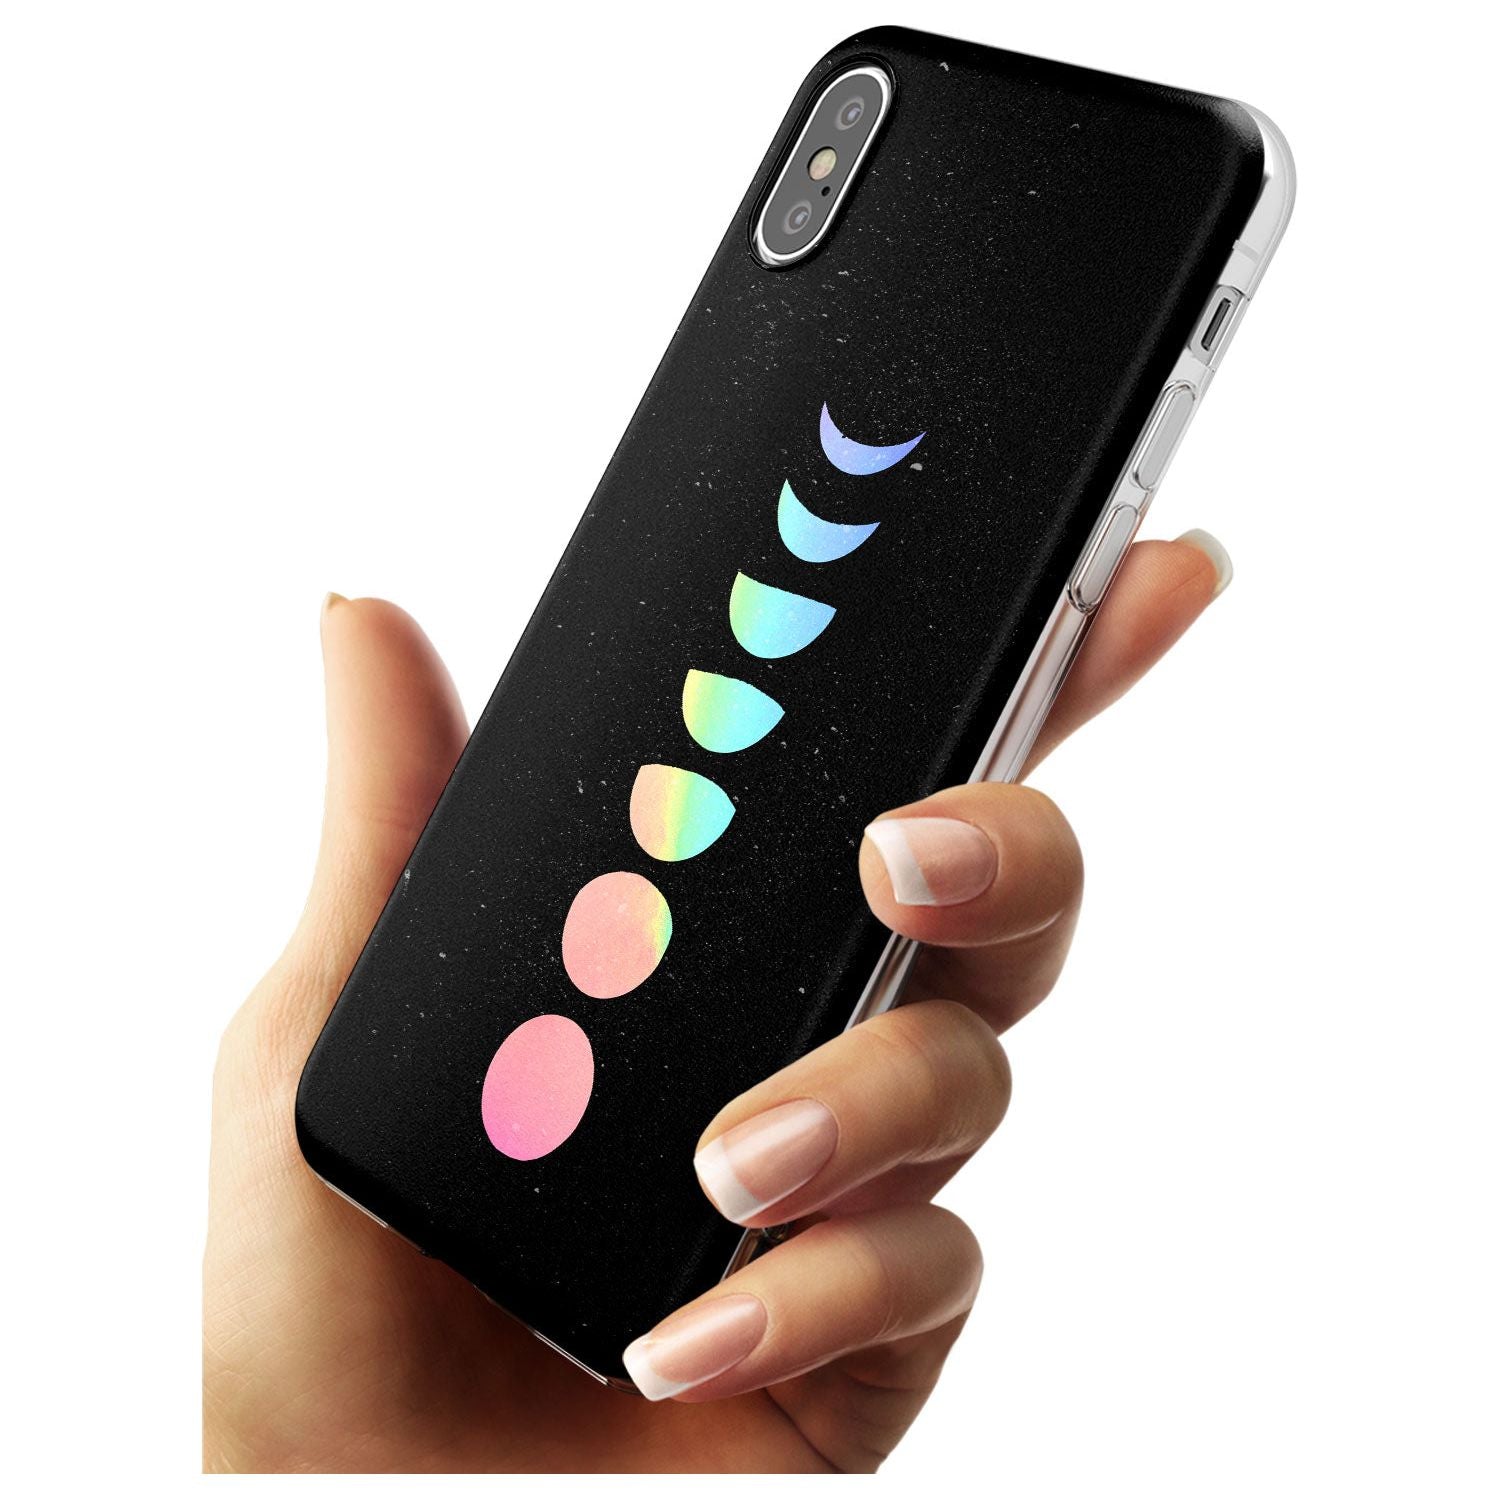 Pastel Moon Phases Black Impact Phone Case for iPhone X XS Max XR